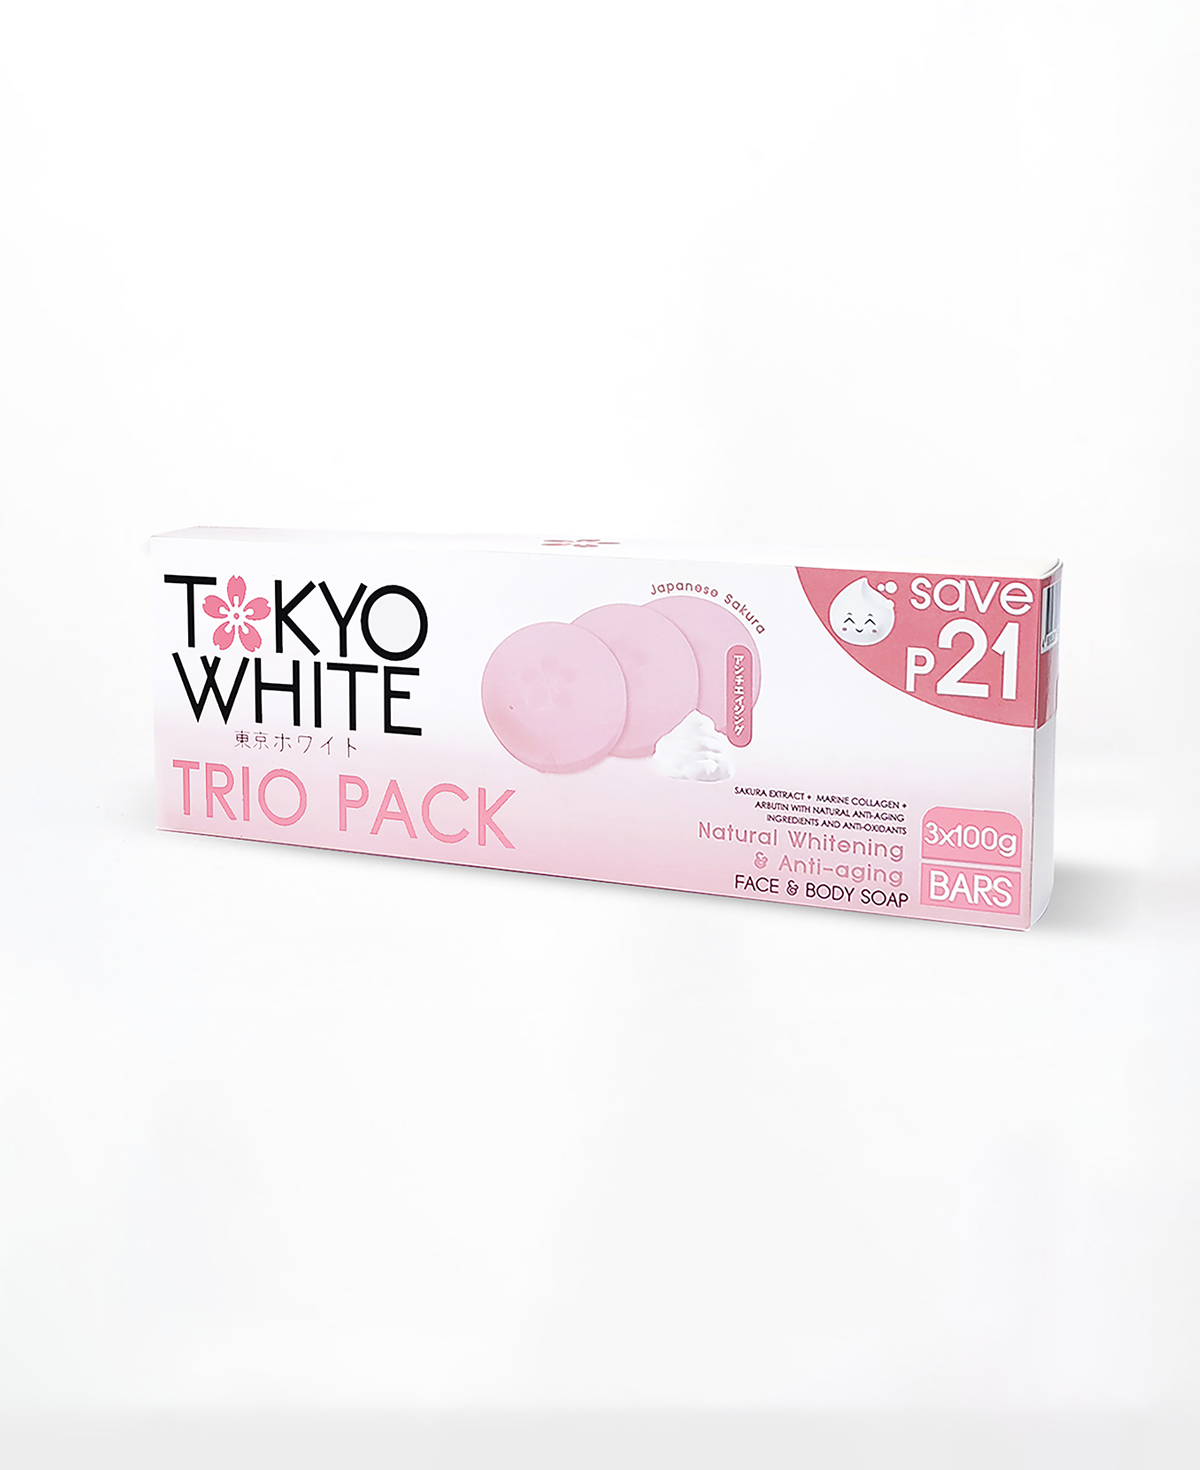 Tokyo White Trio Pack Anti-Aging Face and Body Soap